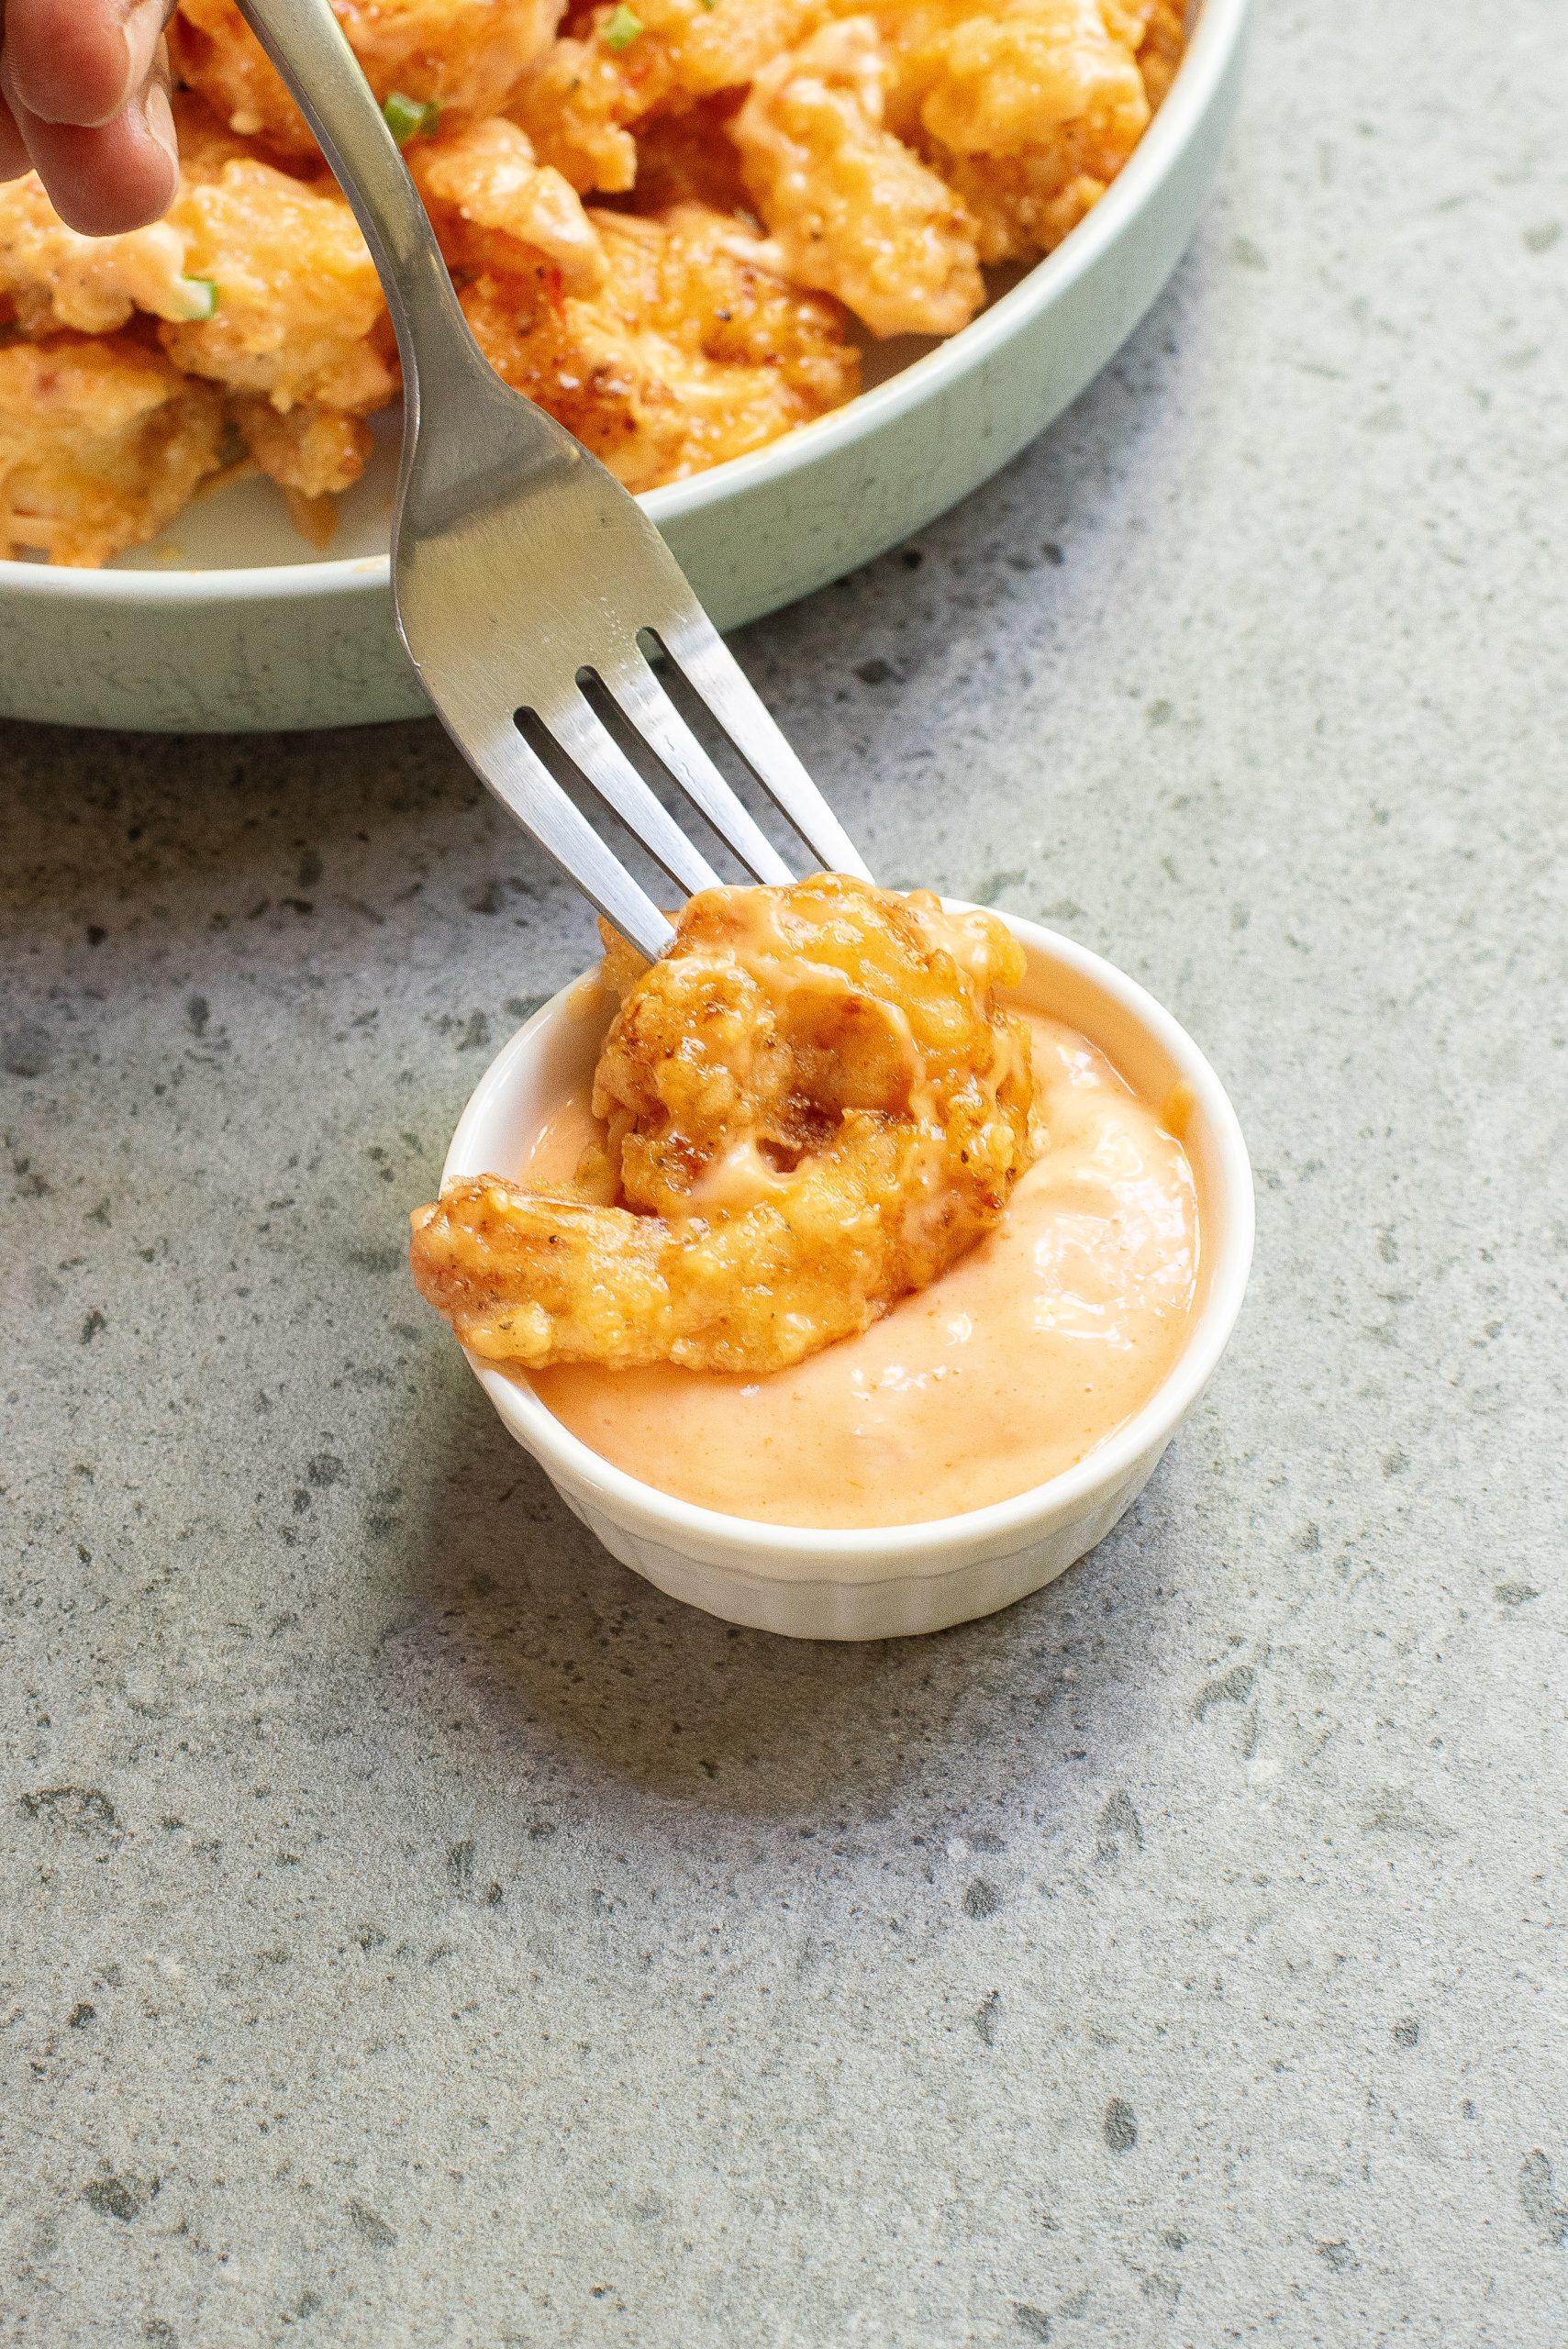 A fork dips a piece of breaded shrimp into a small bowl of creamy orange sauce on a gray surface, with a plate of more shrimp in the background.